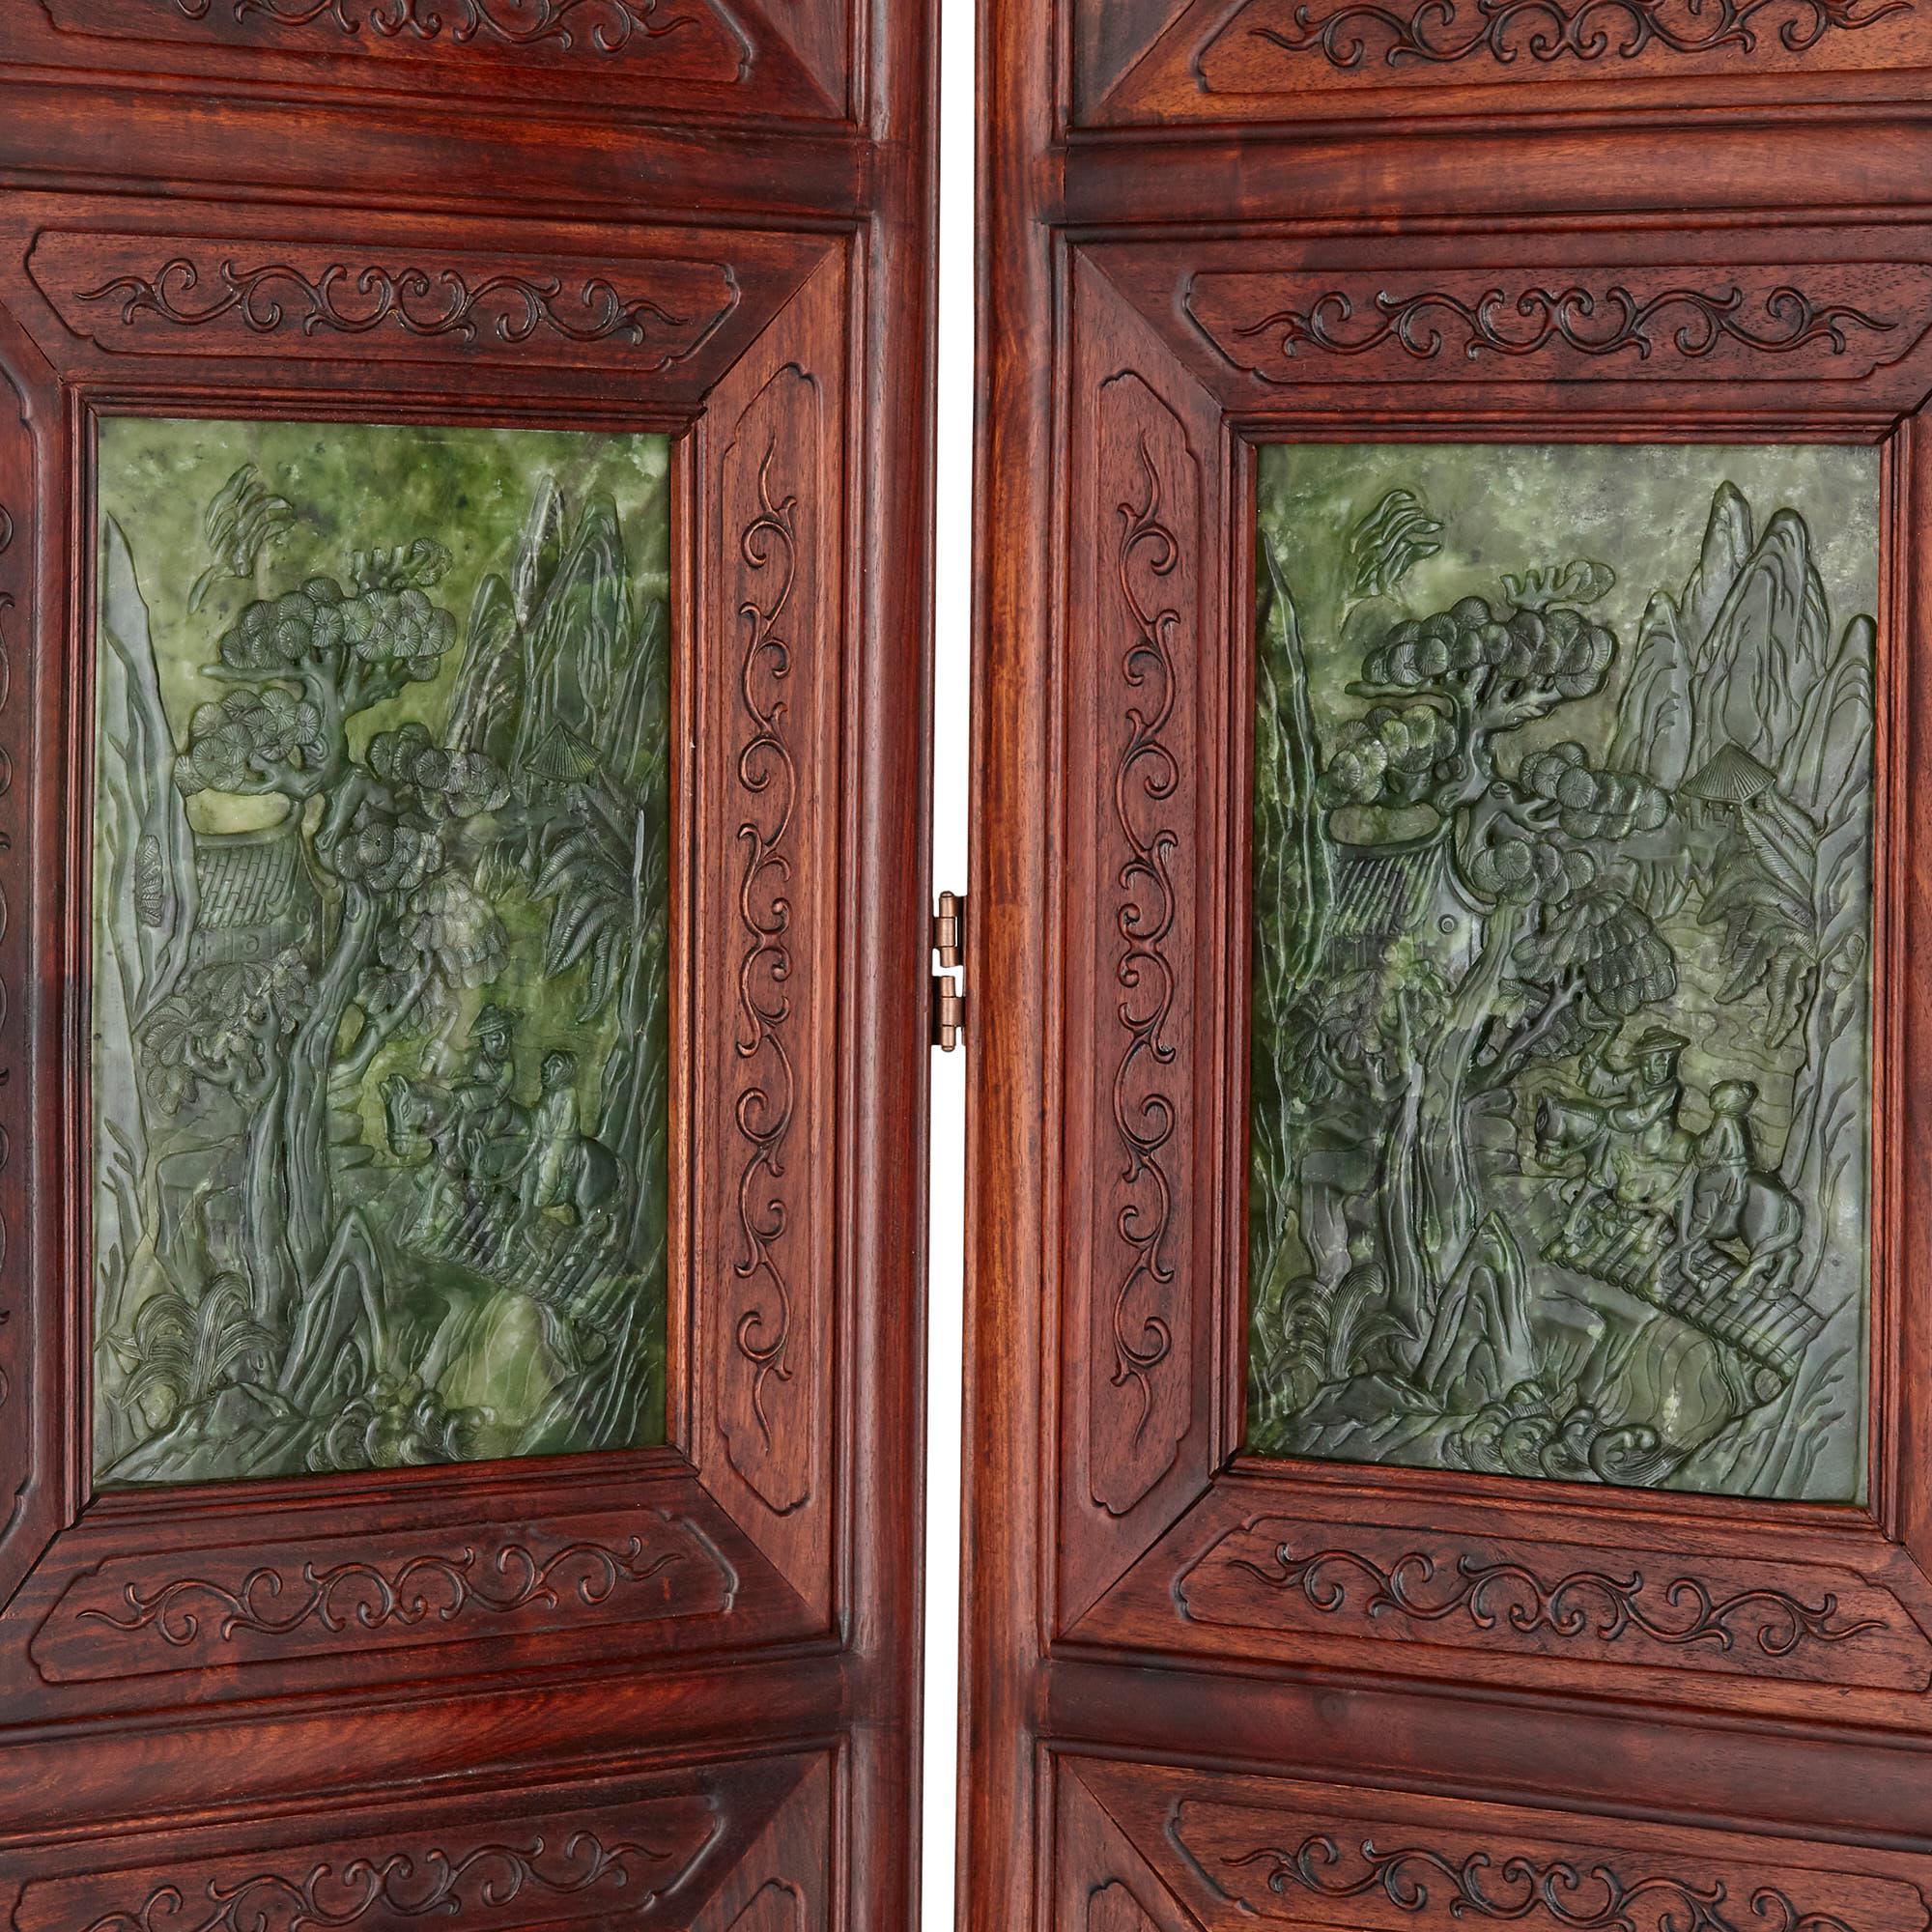 This screen, comprised of four sections and formed from Chinese hardwood and nephrite, is a beautiful piece of Chinese design—the dark lustre of the nephrite accenting the warm tones of the hardwood. Each wooden section of the screen, carved with